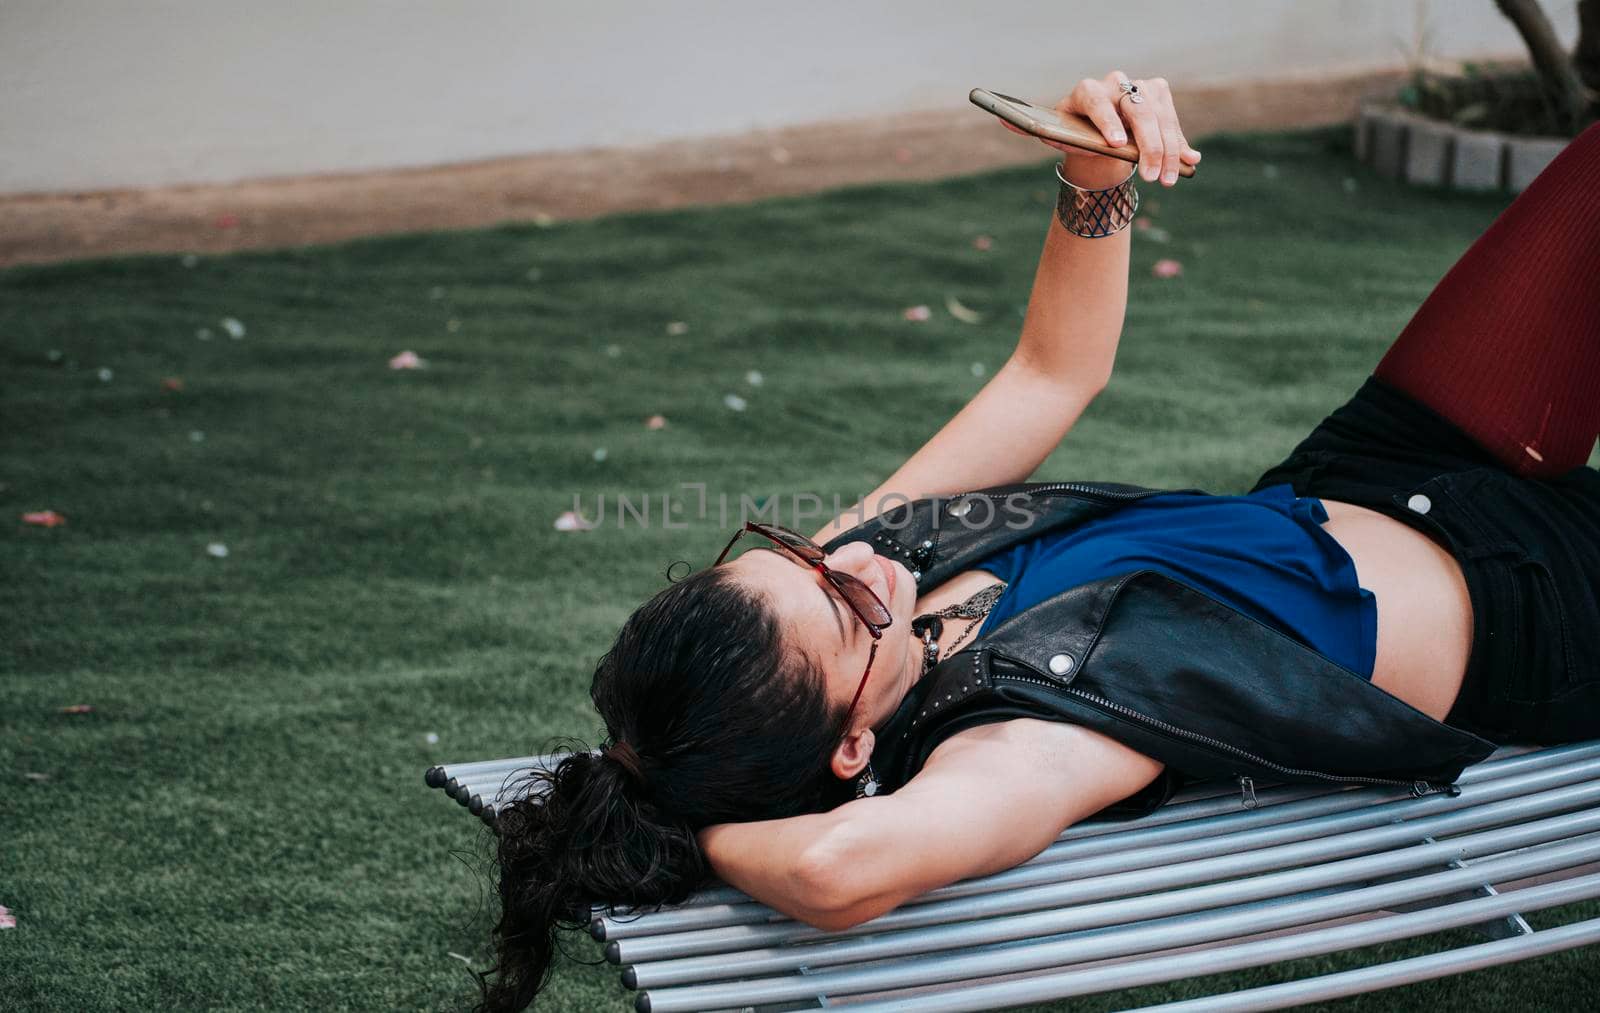 A girl lying on a bench with her cell phone, A woman lying on a bench with her cell phone, Girl lying down texting on her cell phone